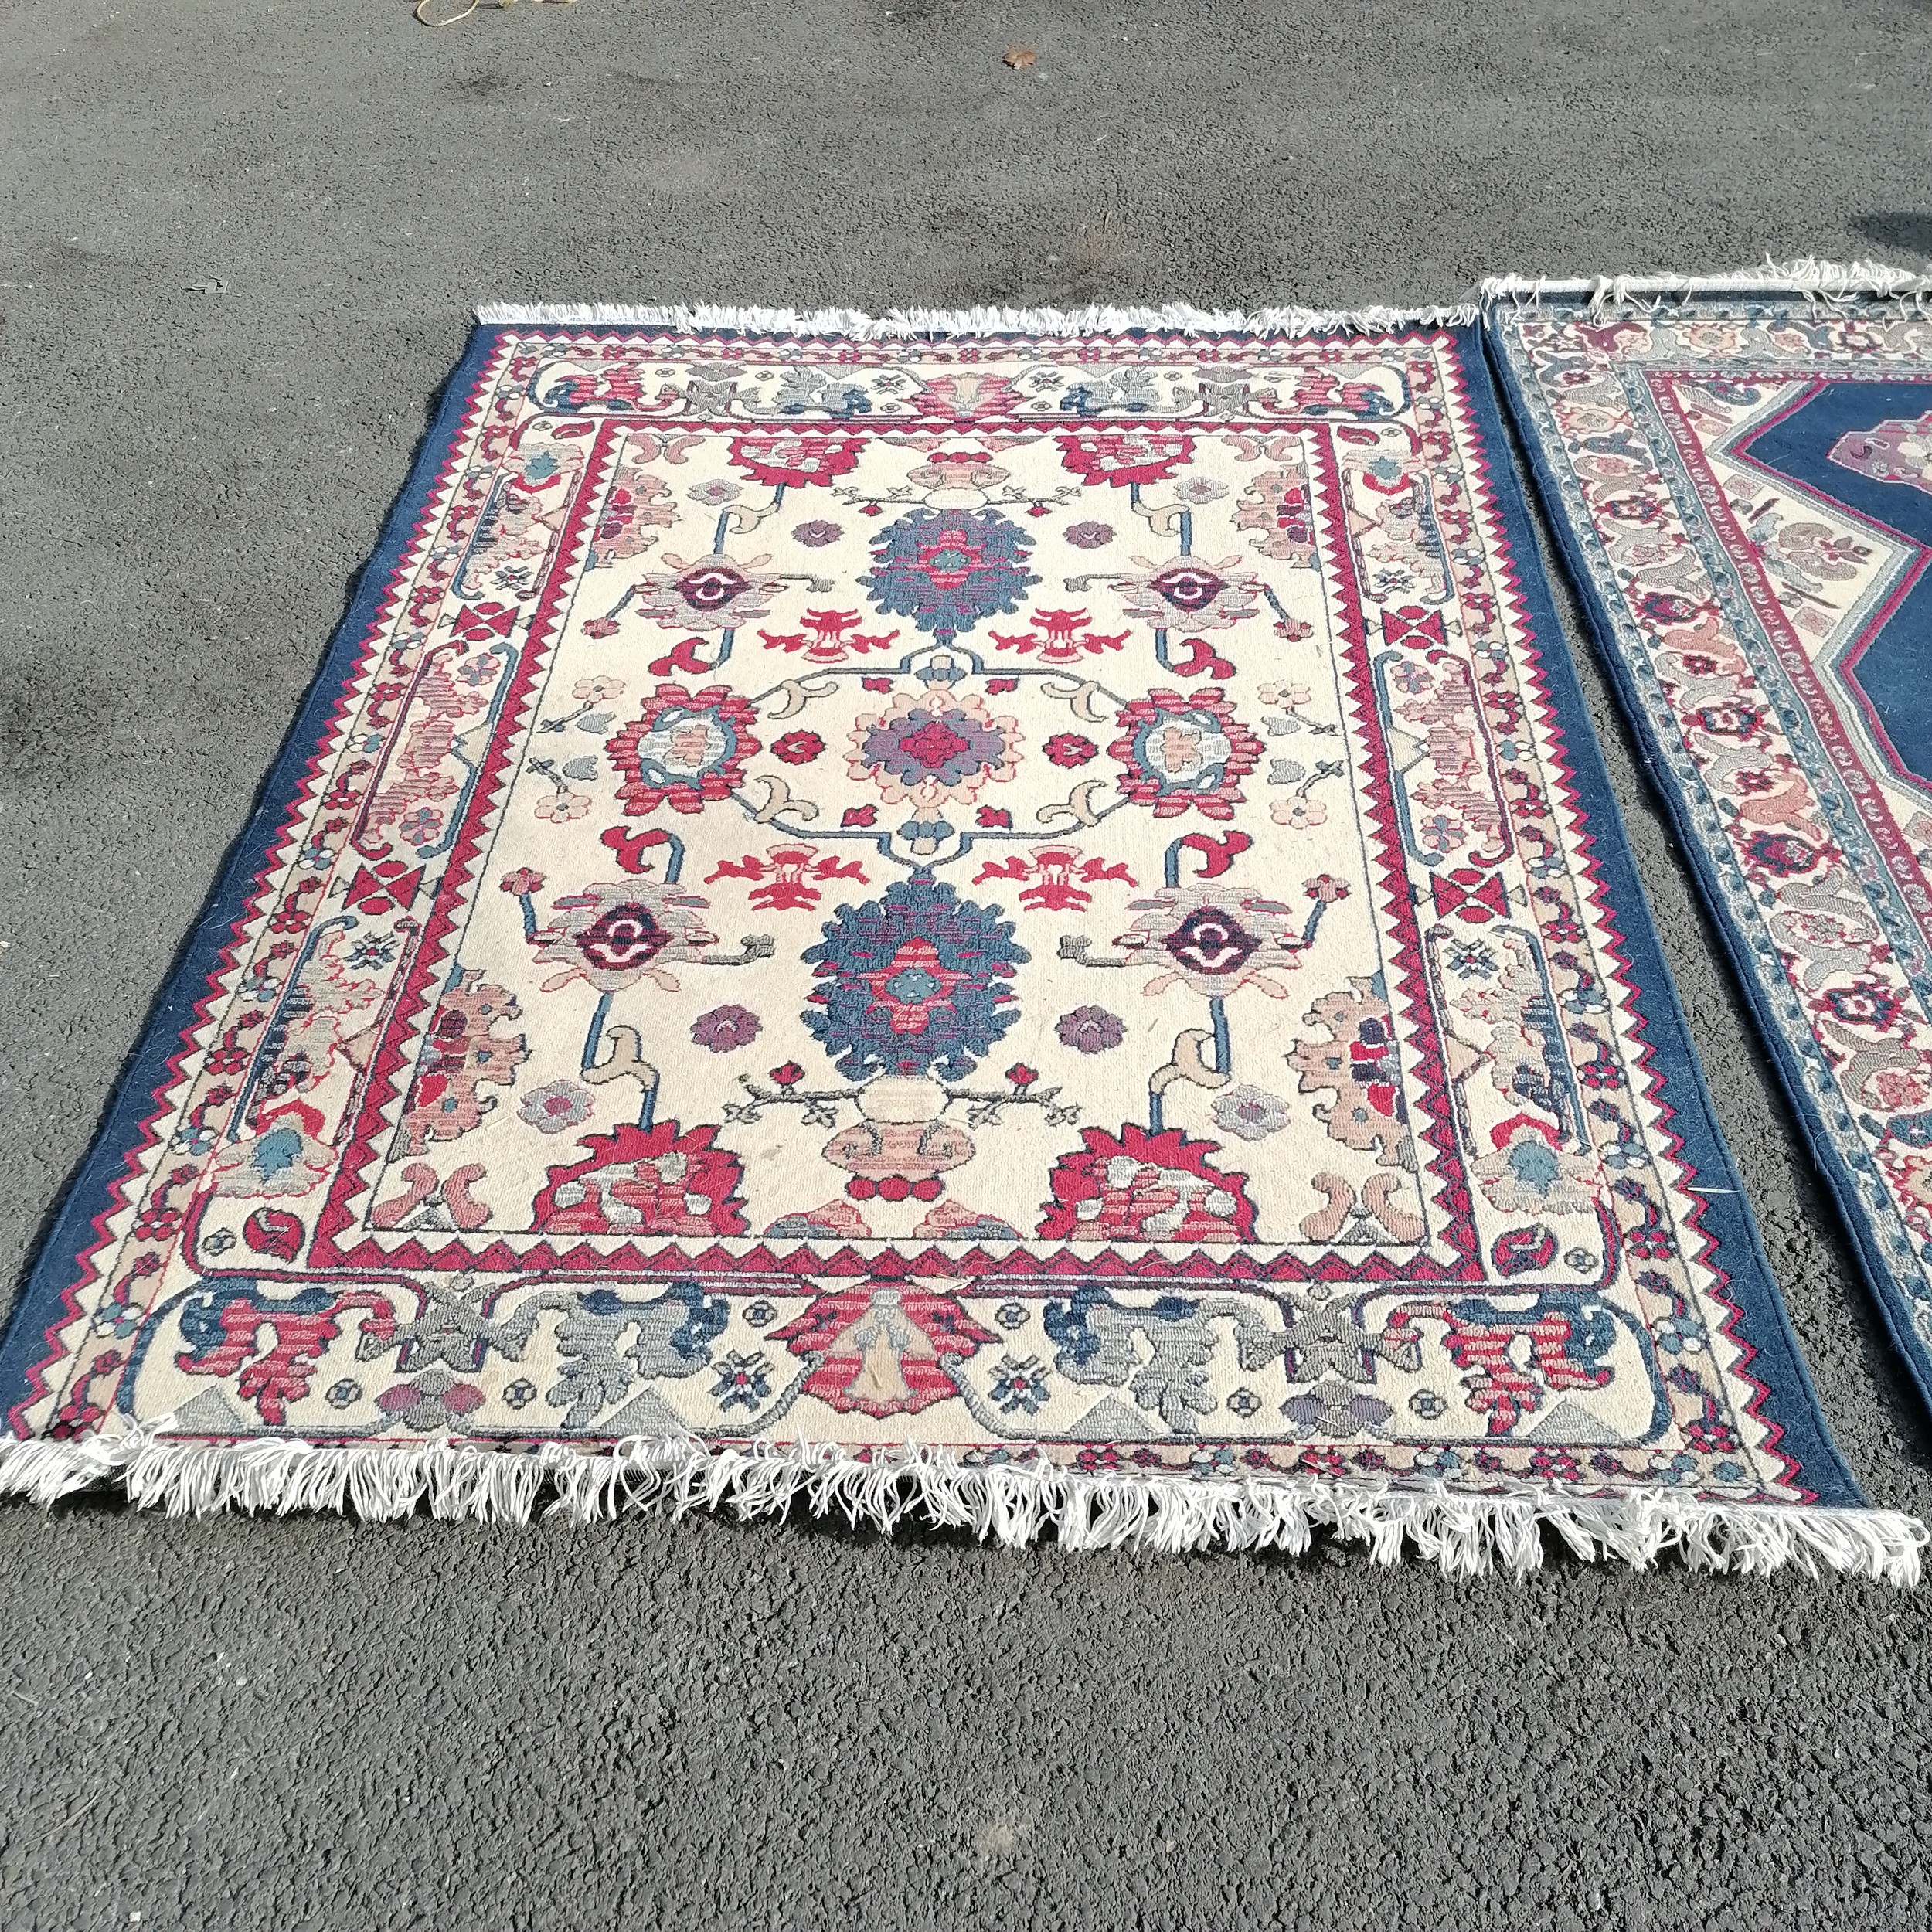 3 x blue ground carpets 230 cm x 168 cm in used condition - Image 2 of 4